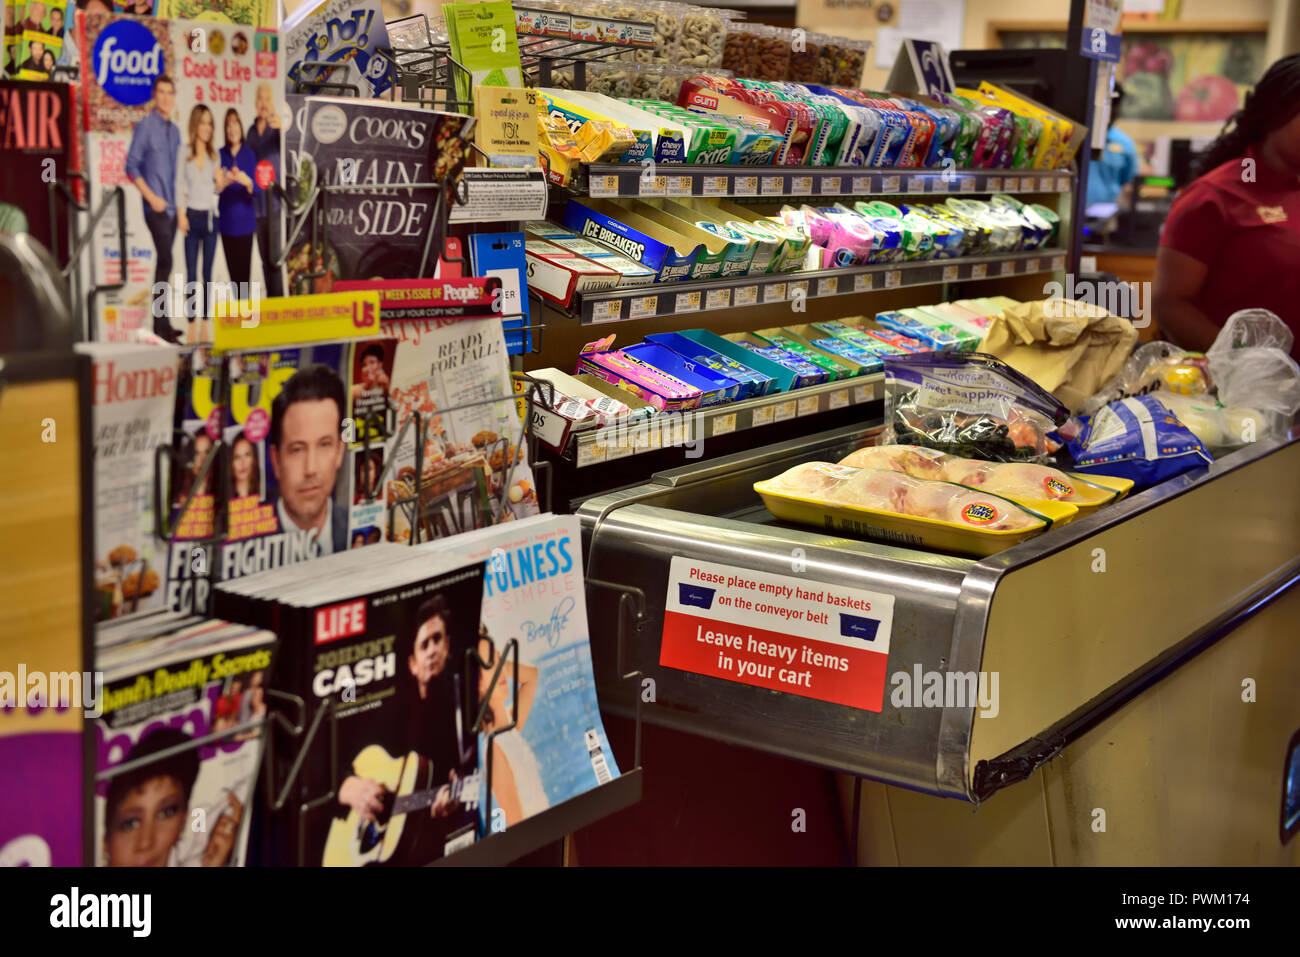 Checkout with conveyor belt past the magazines and sweets display in supermarket for impulse selling, USA Stock Photo